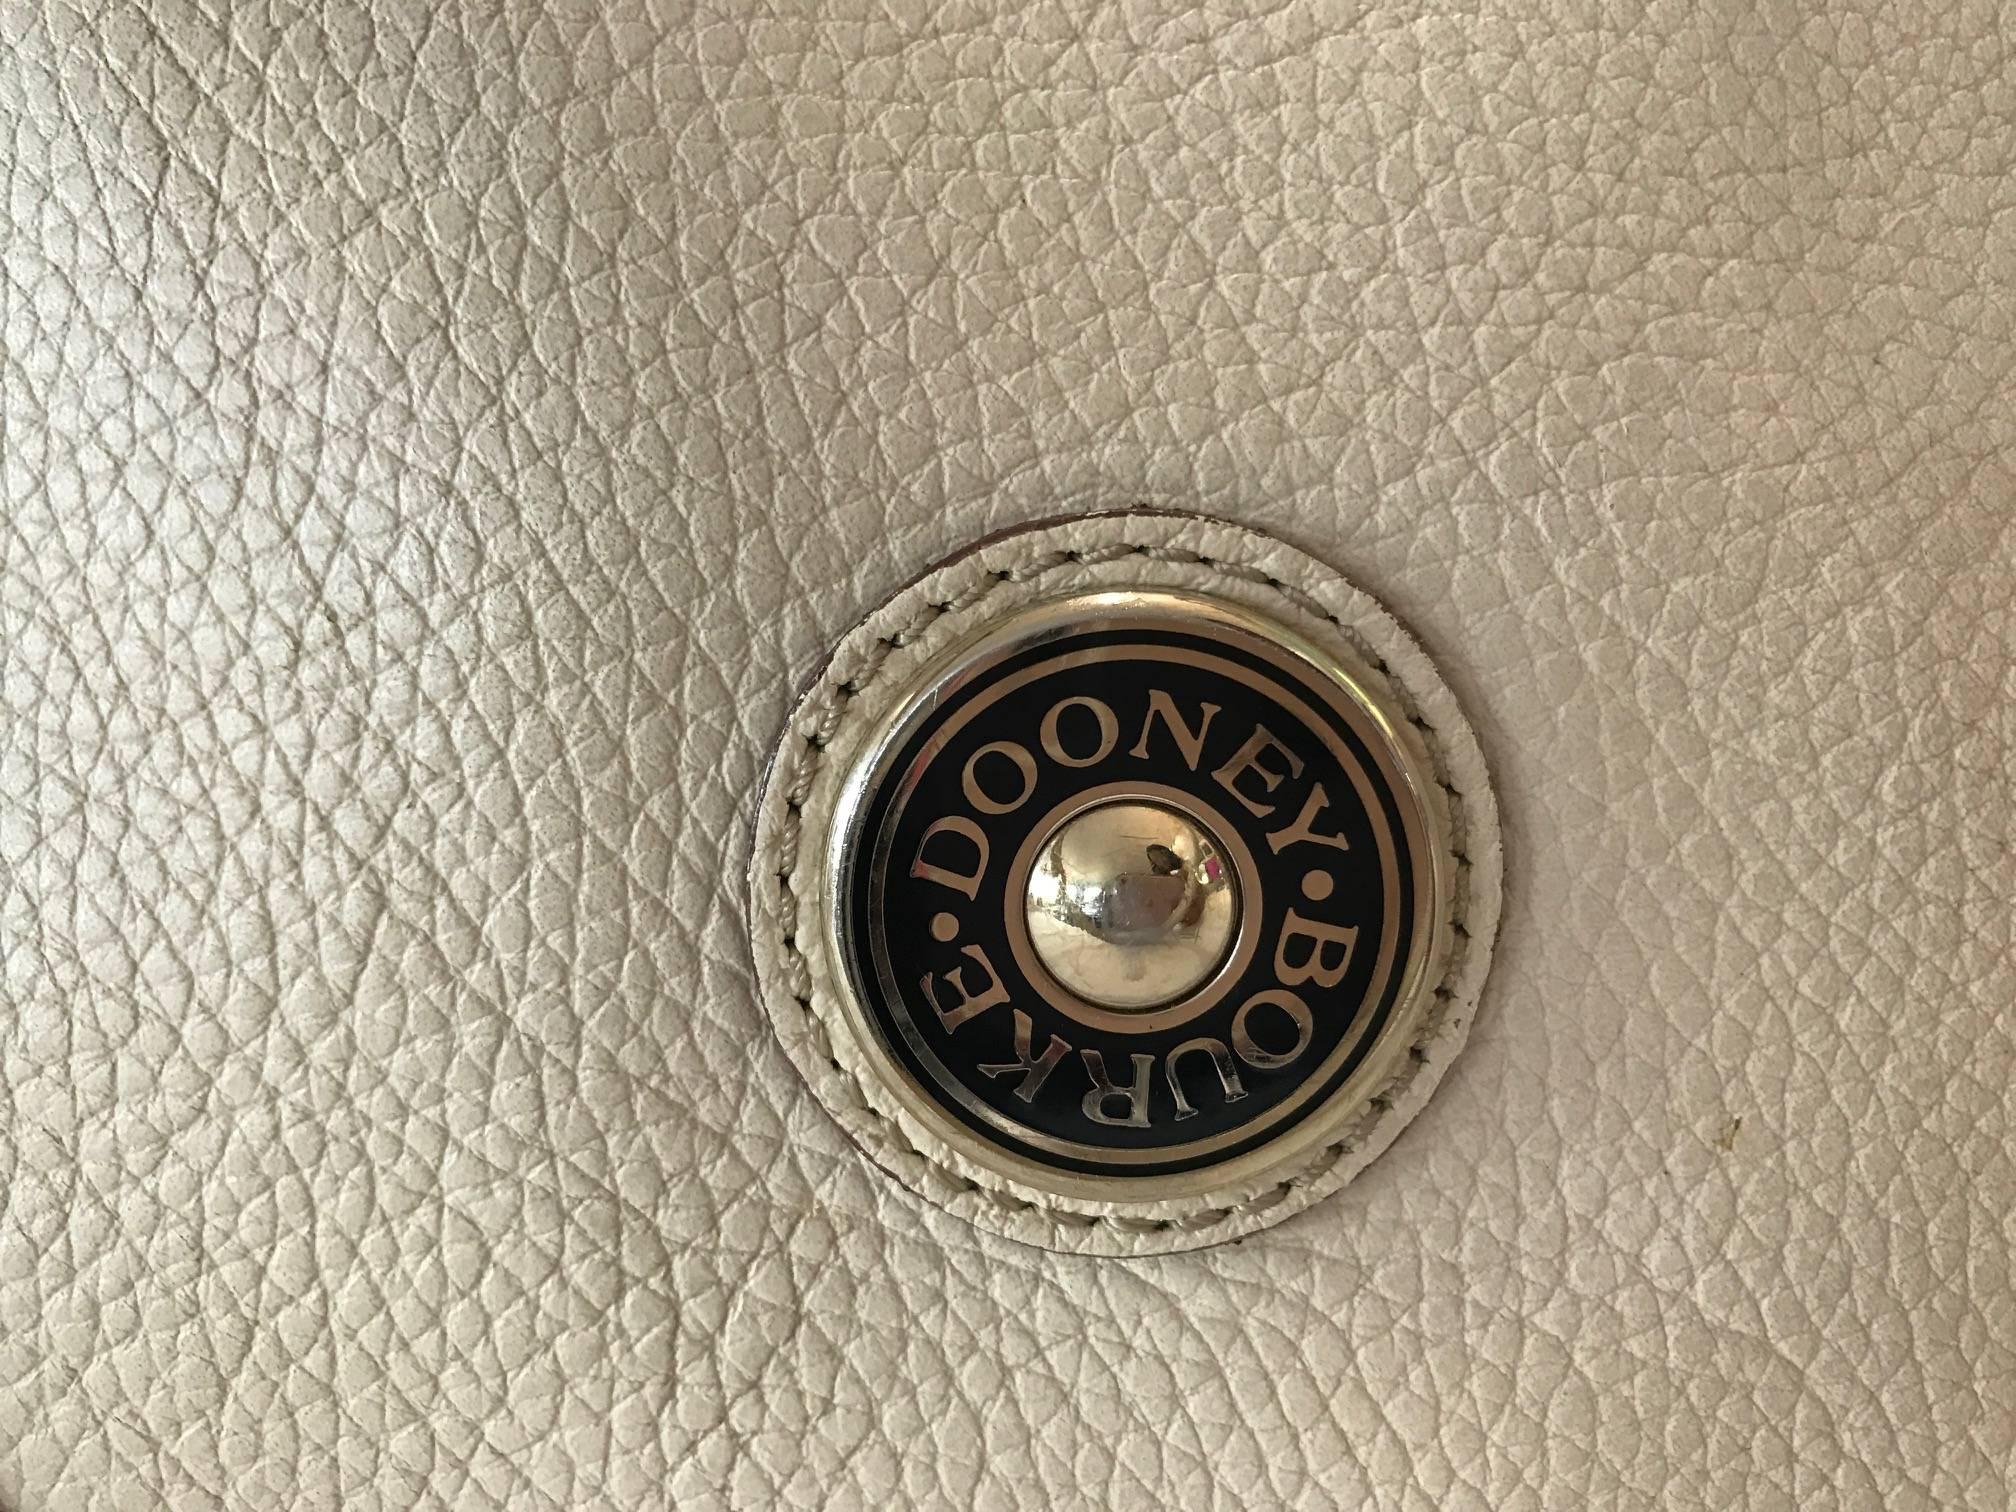 Contemporary Authentic Creme Colored Dooney Bourke Leather Hand Bag, Clean, Rarely Used For Sale